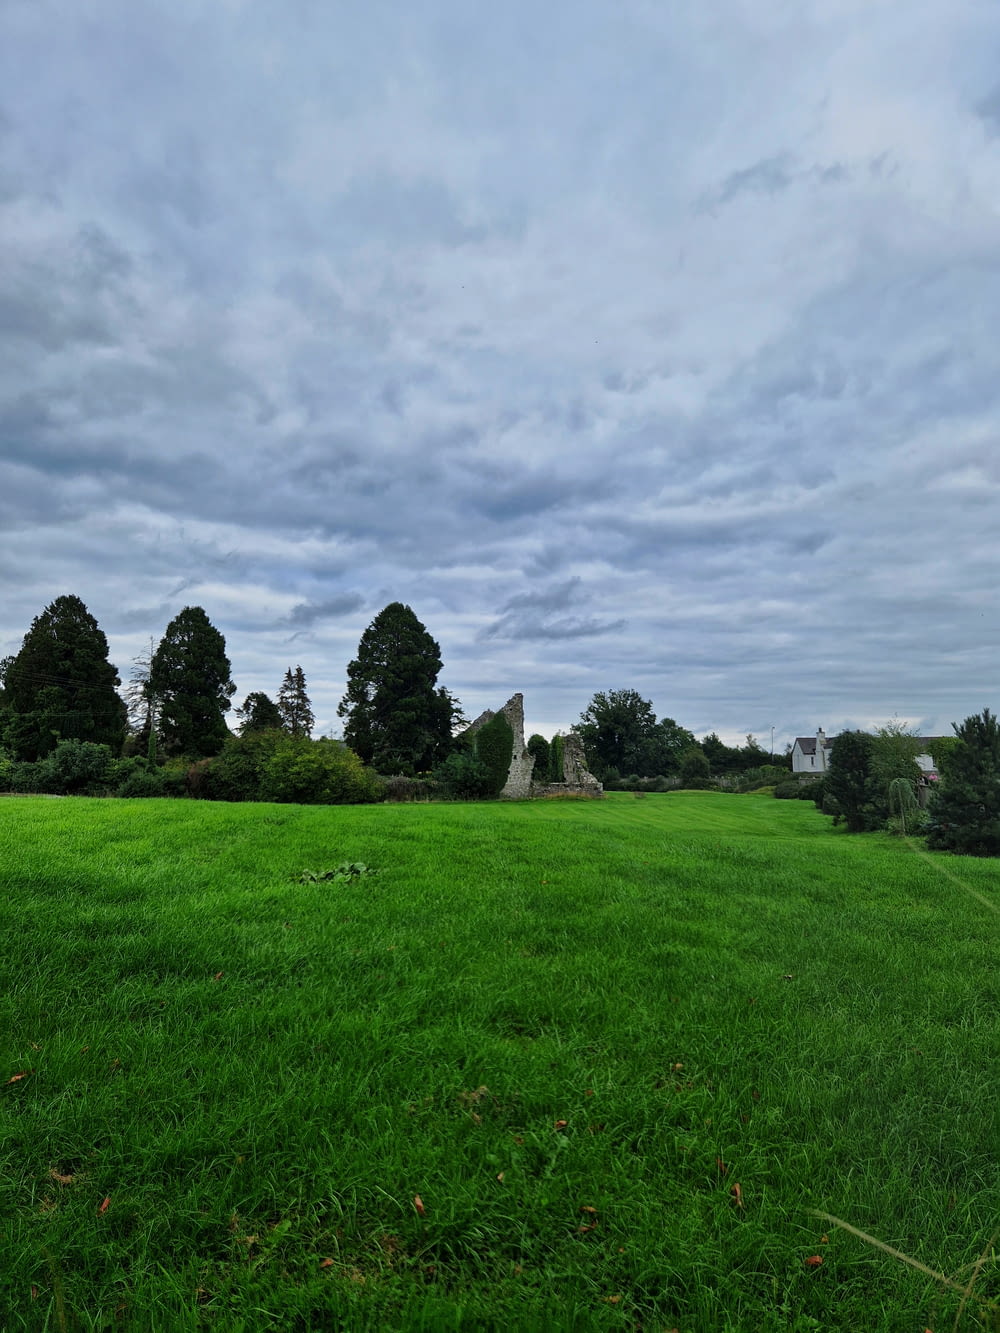 a grassy field with trees and stone structures in the distance